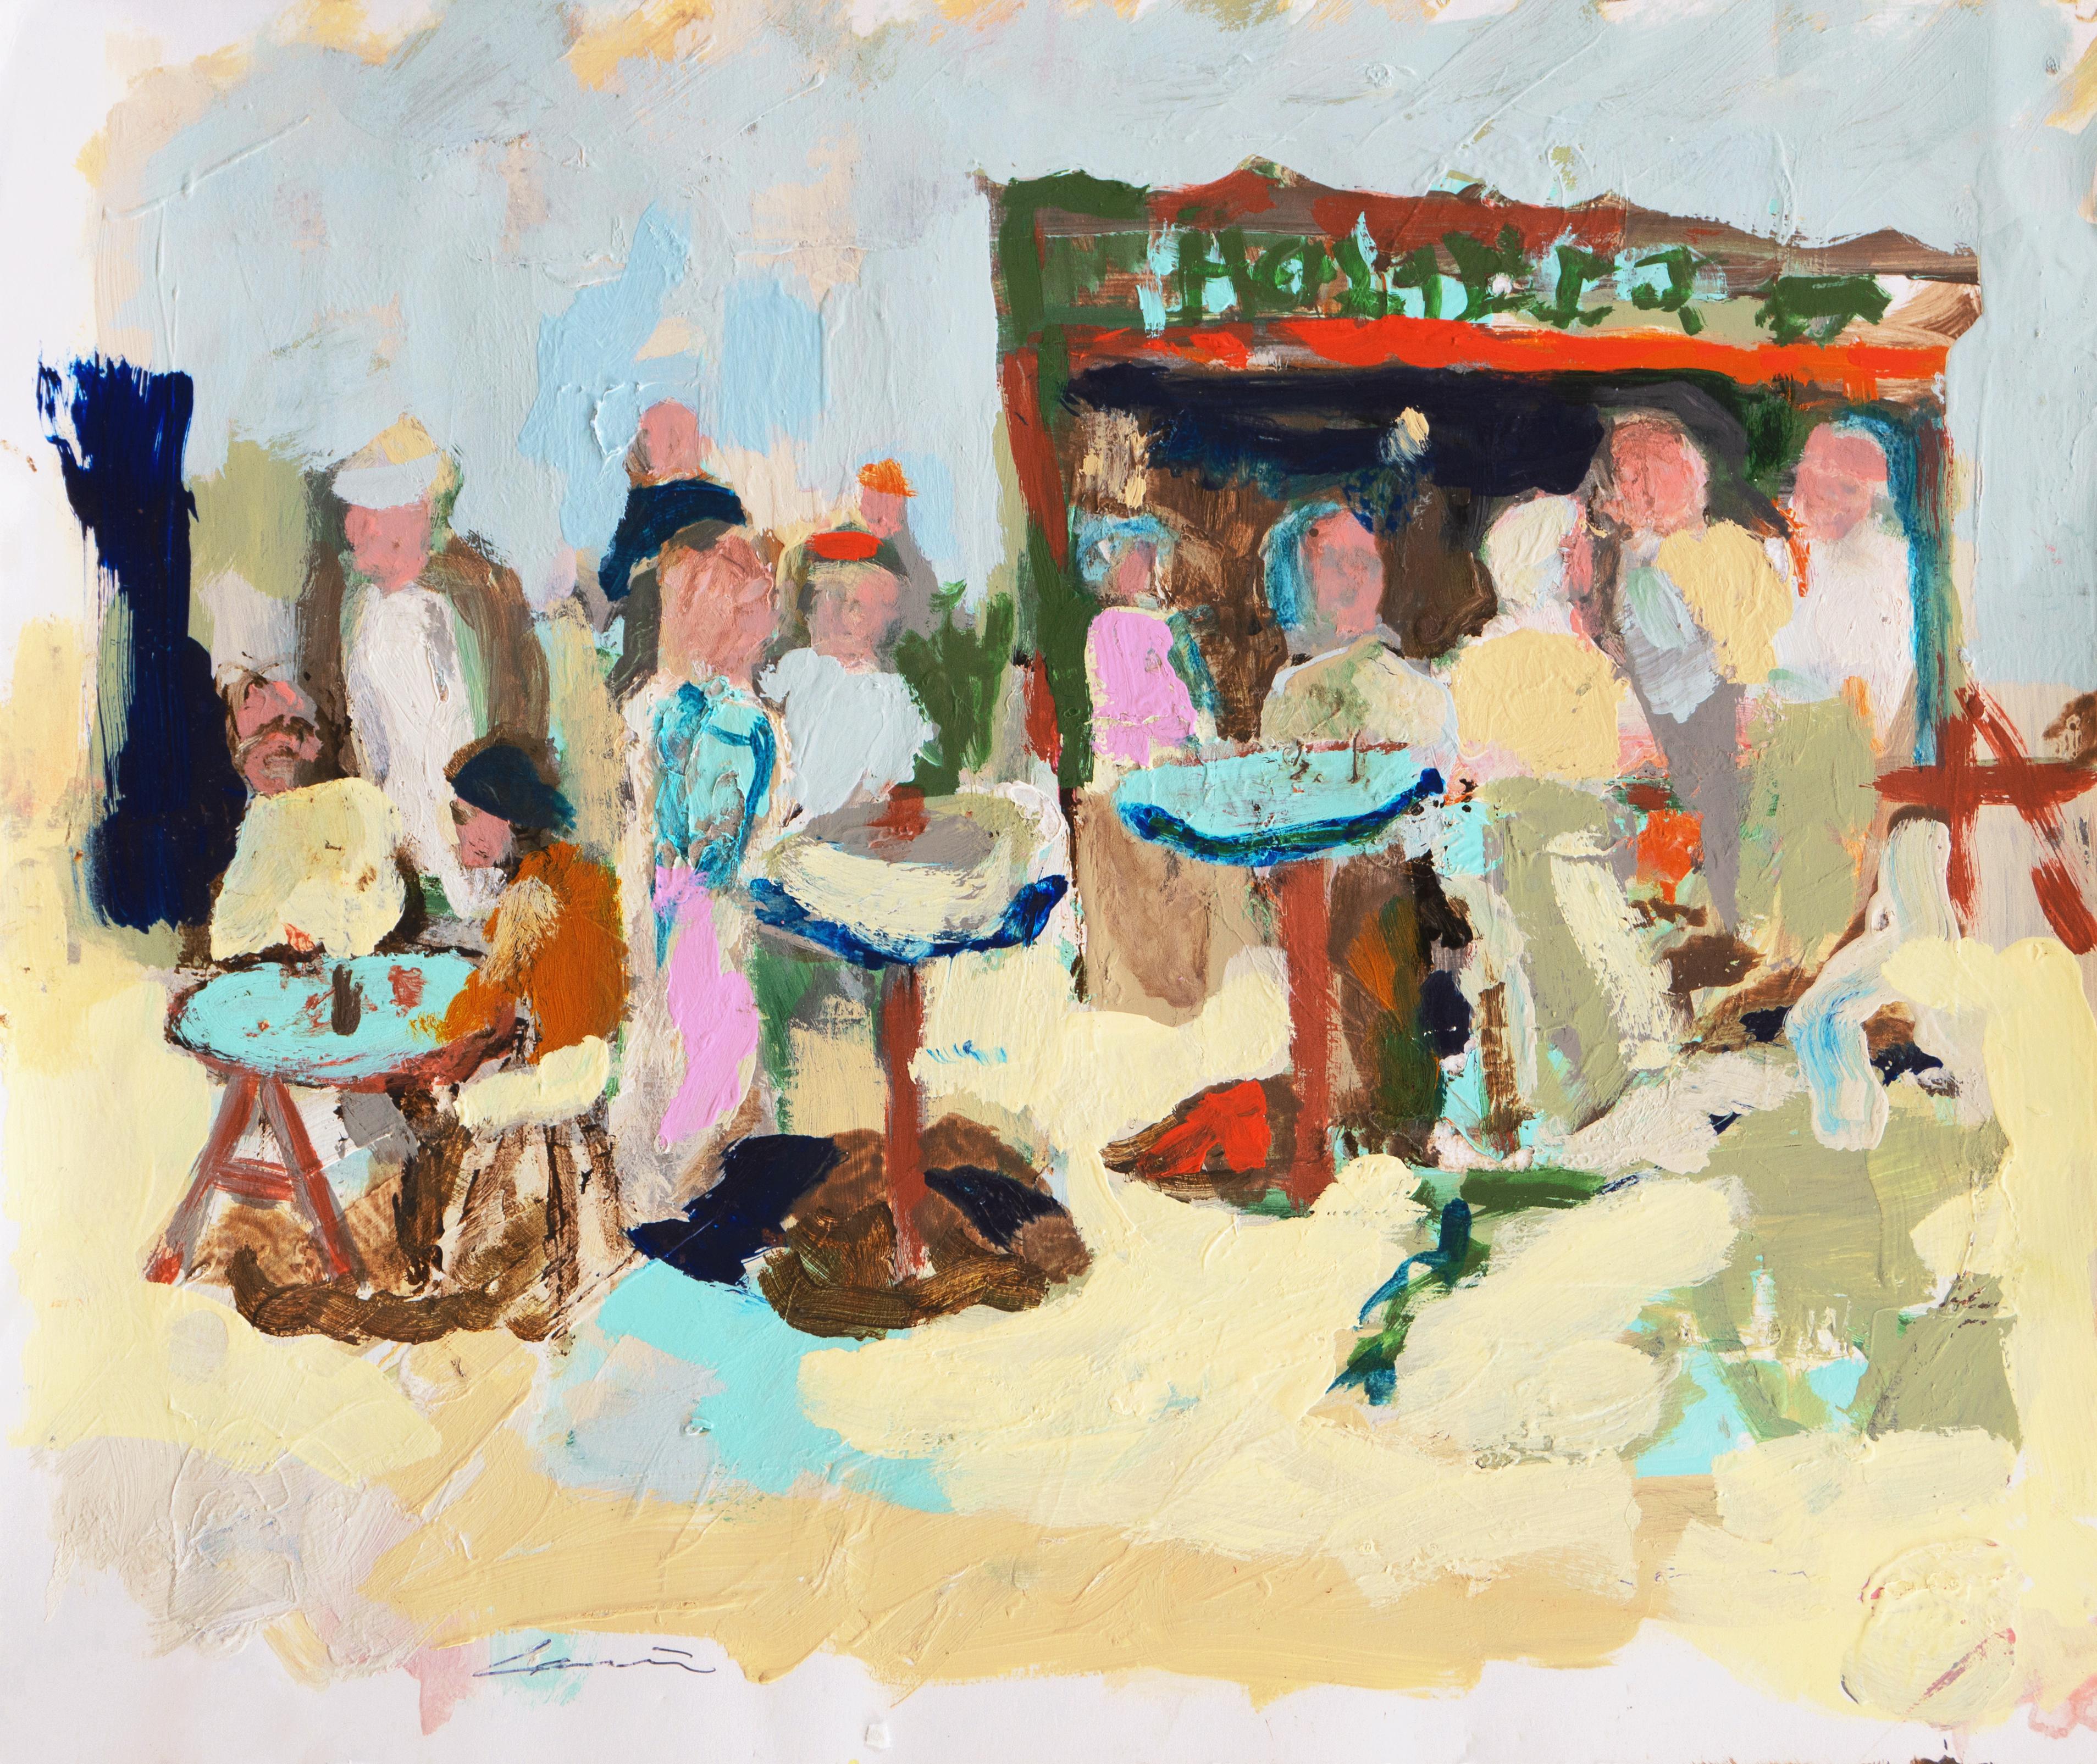 'Fish Market, Cannery Row, Monterey', California Expressionist, Stanford, Carmel